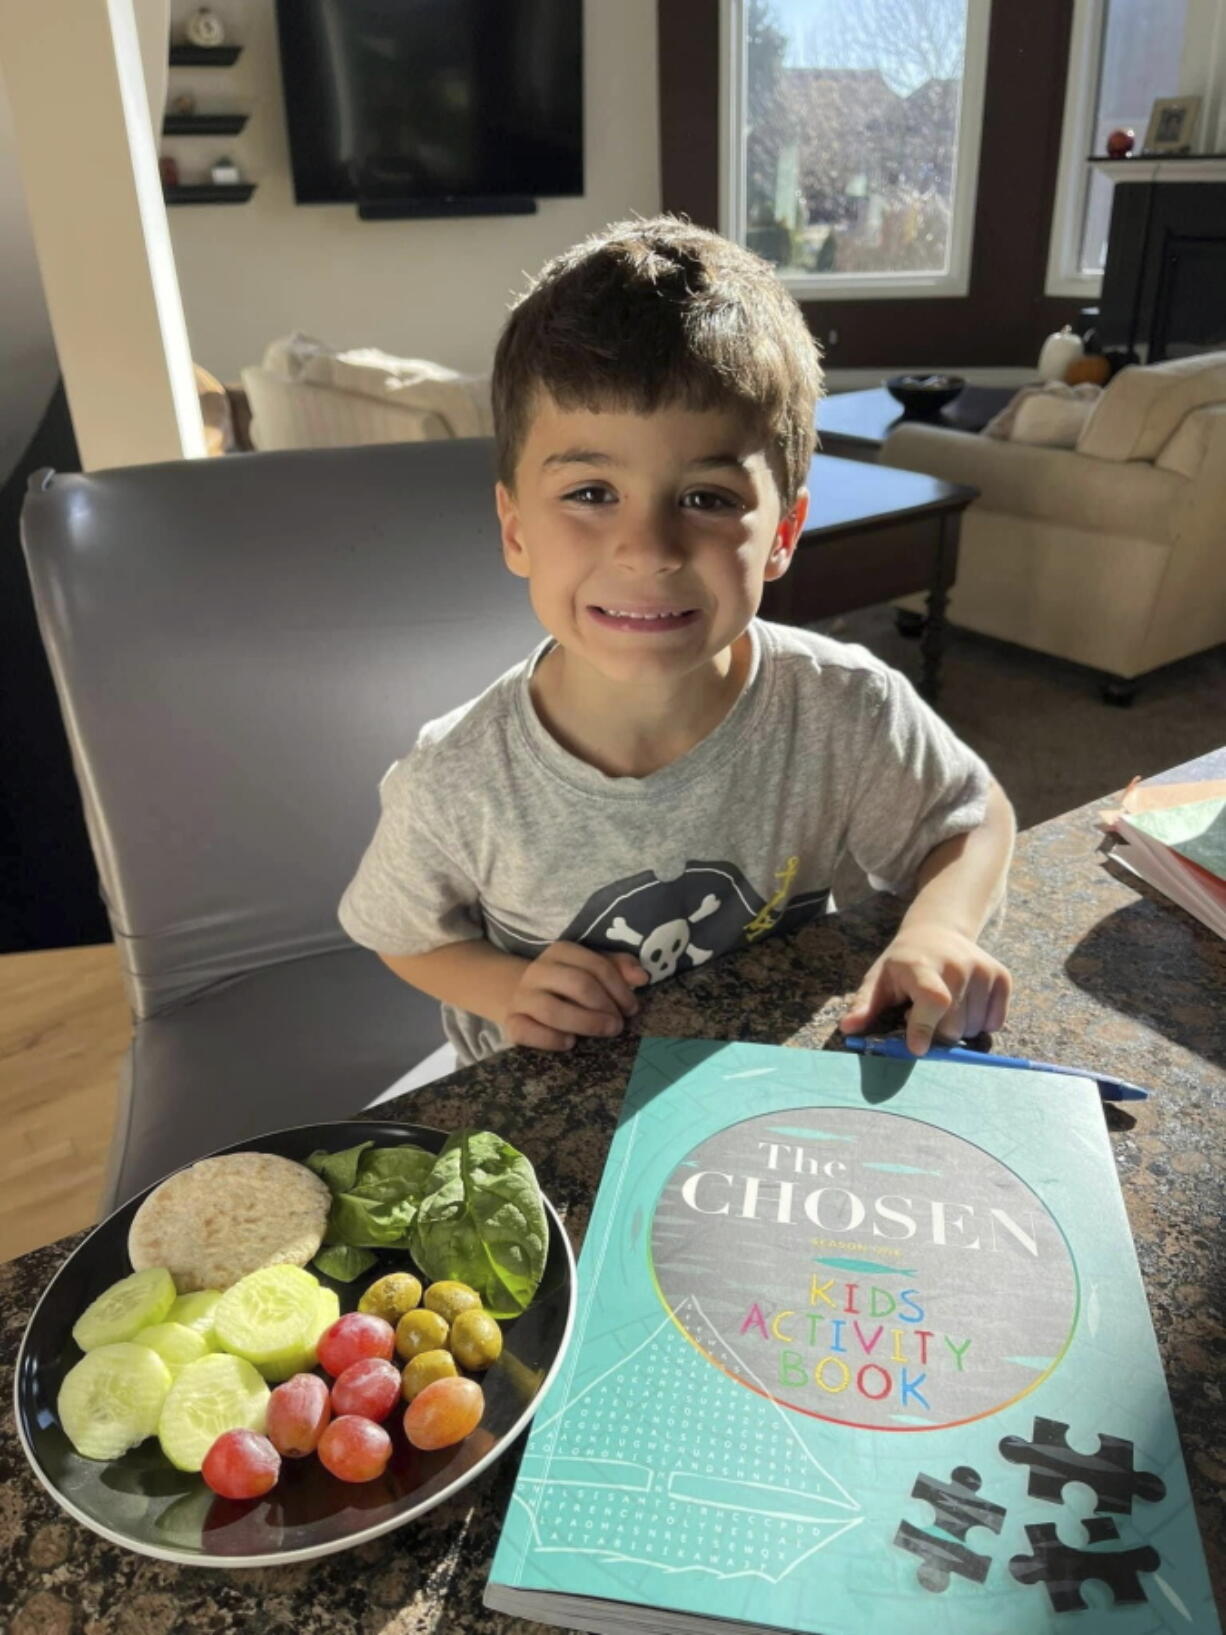 This October 2022 photo provided by Kristin Stonehouse shows her son, Mason Stonehouse, 6, in Chesterfield, Mich. Mason Stonehouse used his father,??s Grubhub account to order $1,000 worth of food delivered to his home on Saturday, Jan. 28, 2023. His father, Keith Stonehouse, was not aware his son was ordering the food and at first did nt understand why delivery people kept ringing his doorbell and leaving food.